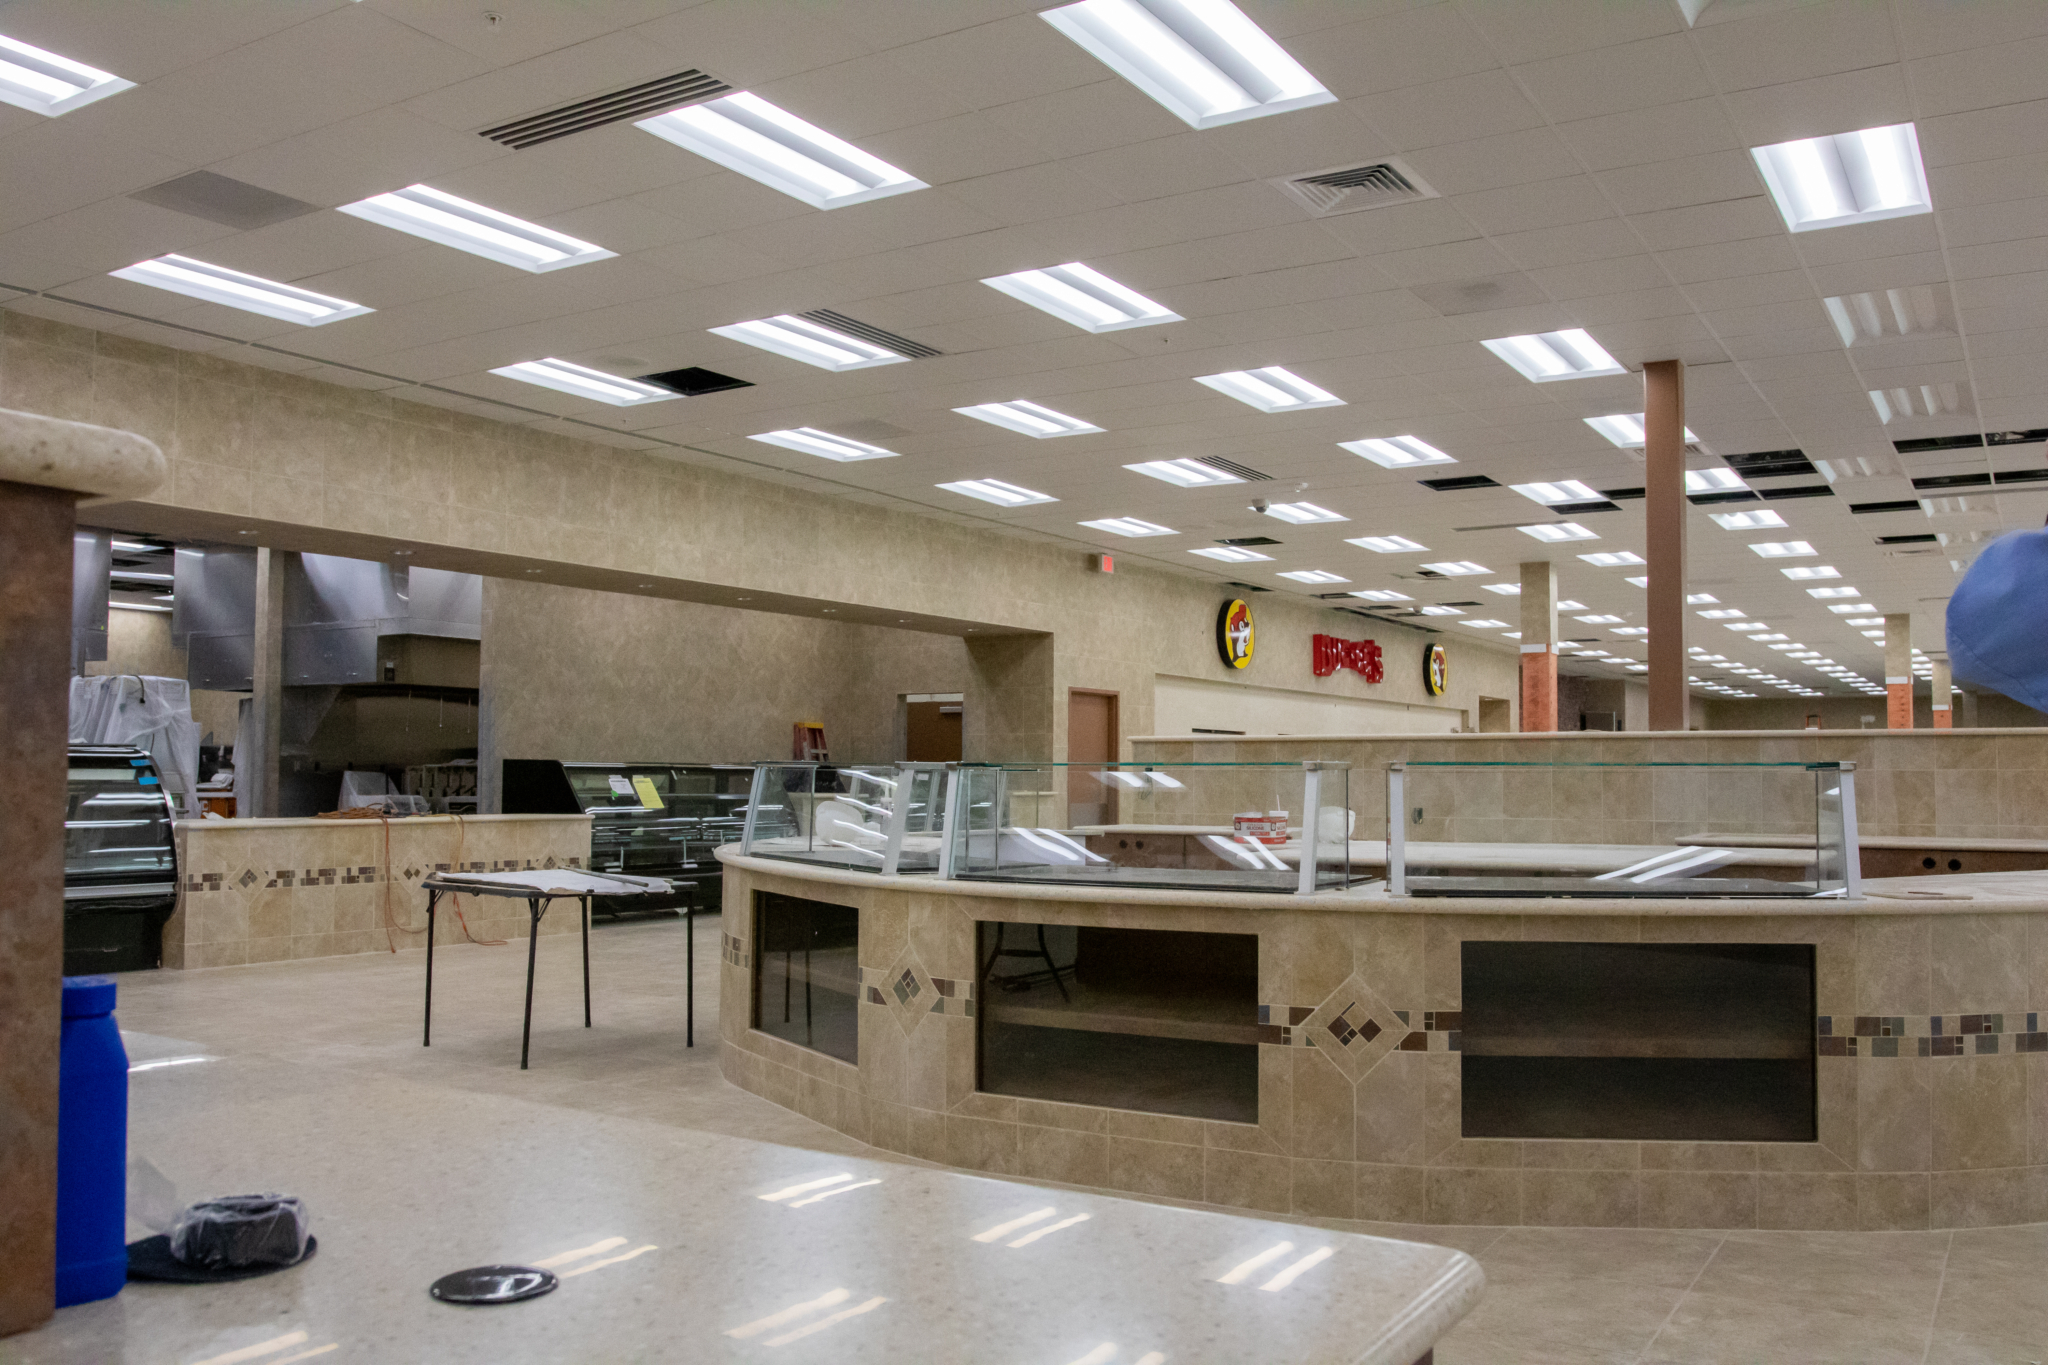 Bucees 7 We got an INSIDE look at the new Buc-EEs in Leeds. Check out the PHOTOS